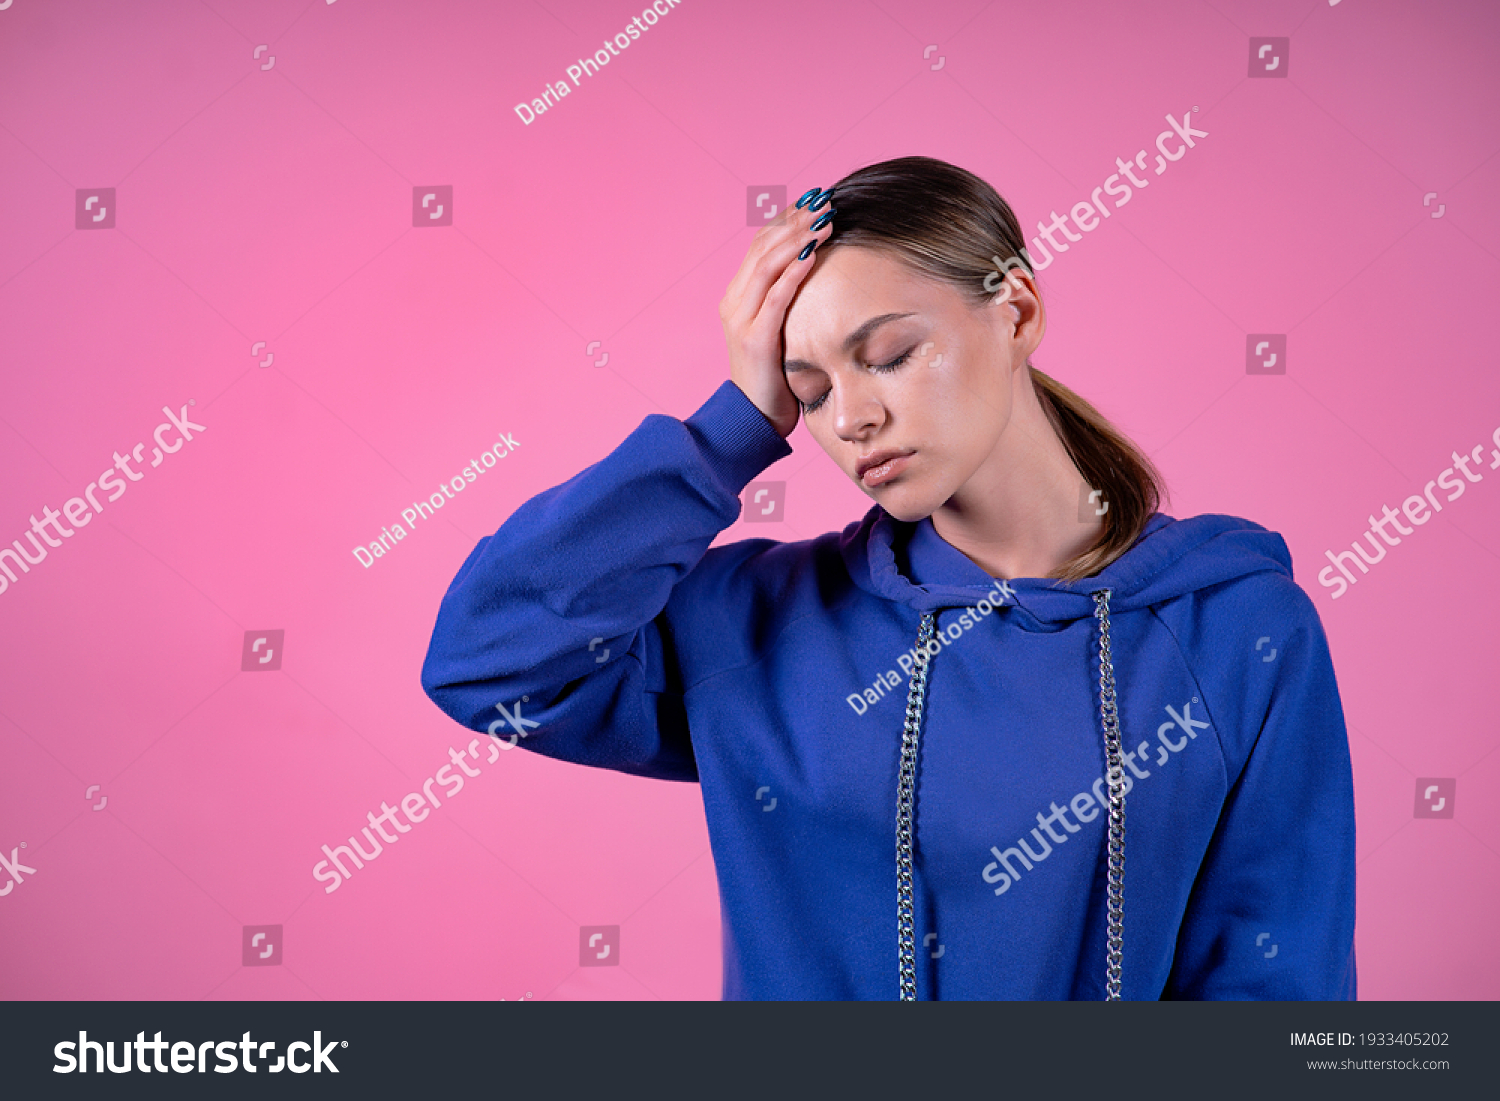 Tired, sick, emaciated girl, young sleepy woman suffering from headache, migraine, lack of sleep, holding her forehead with her hand. Insomnia, fever, health care concept. On pink isolated background #1933405202